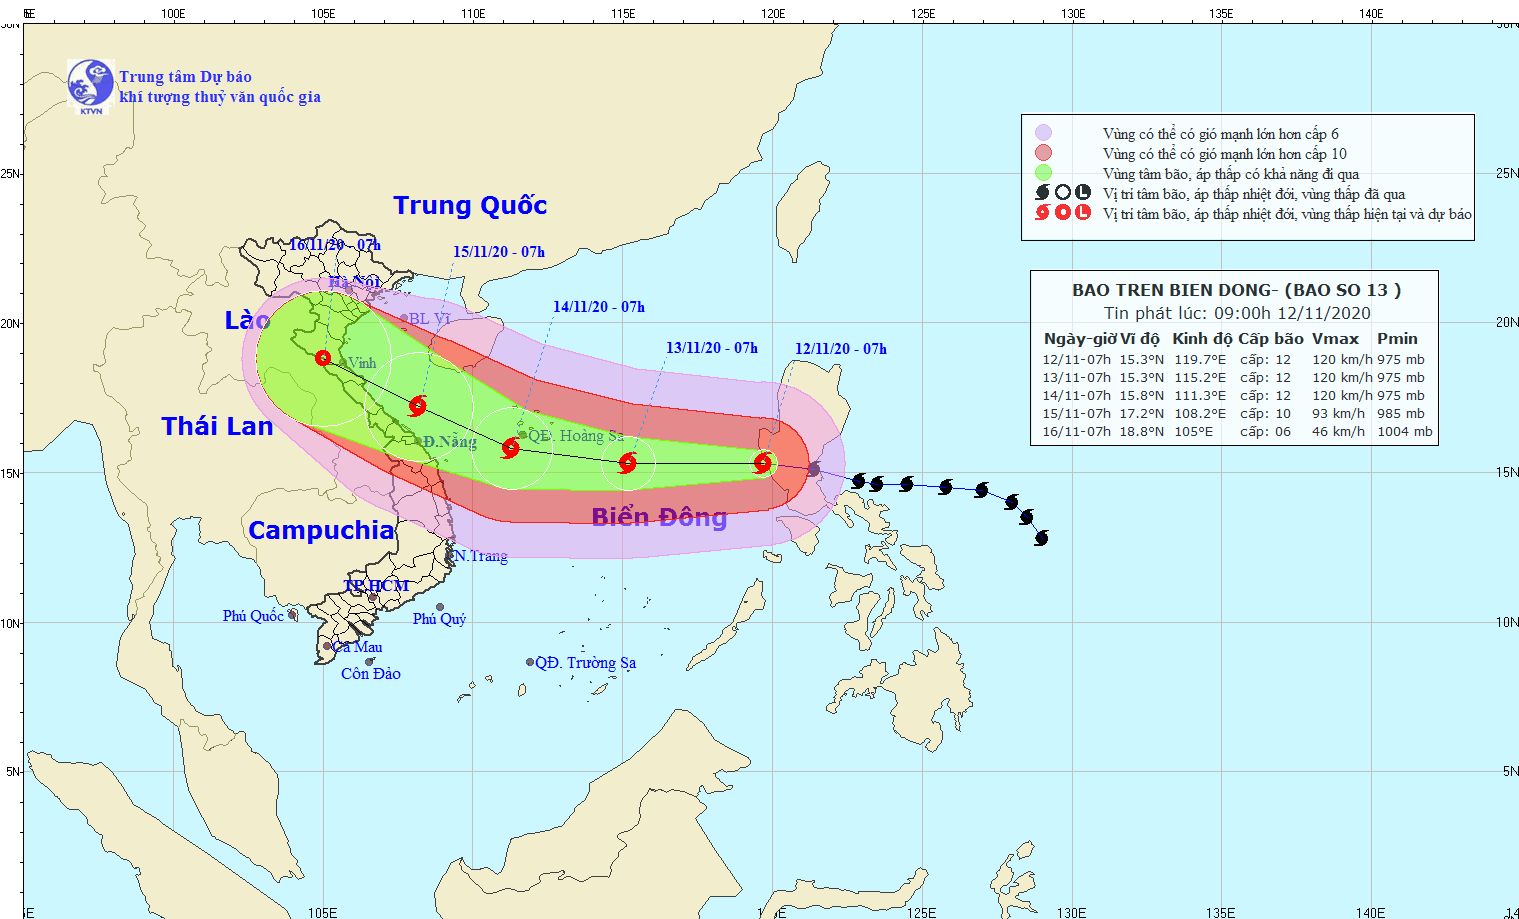 A path map of typhoon Vamco